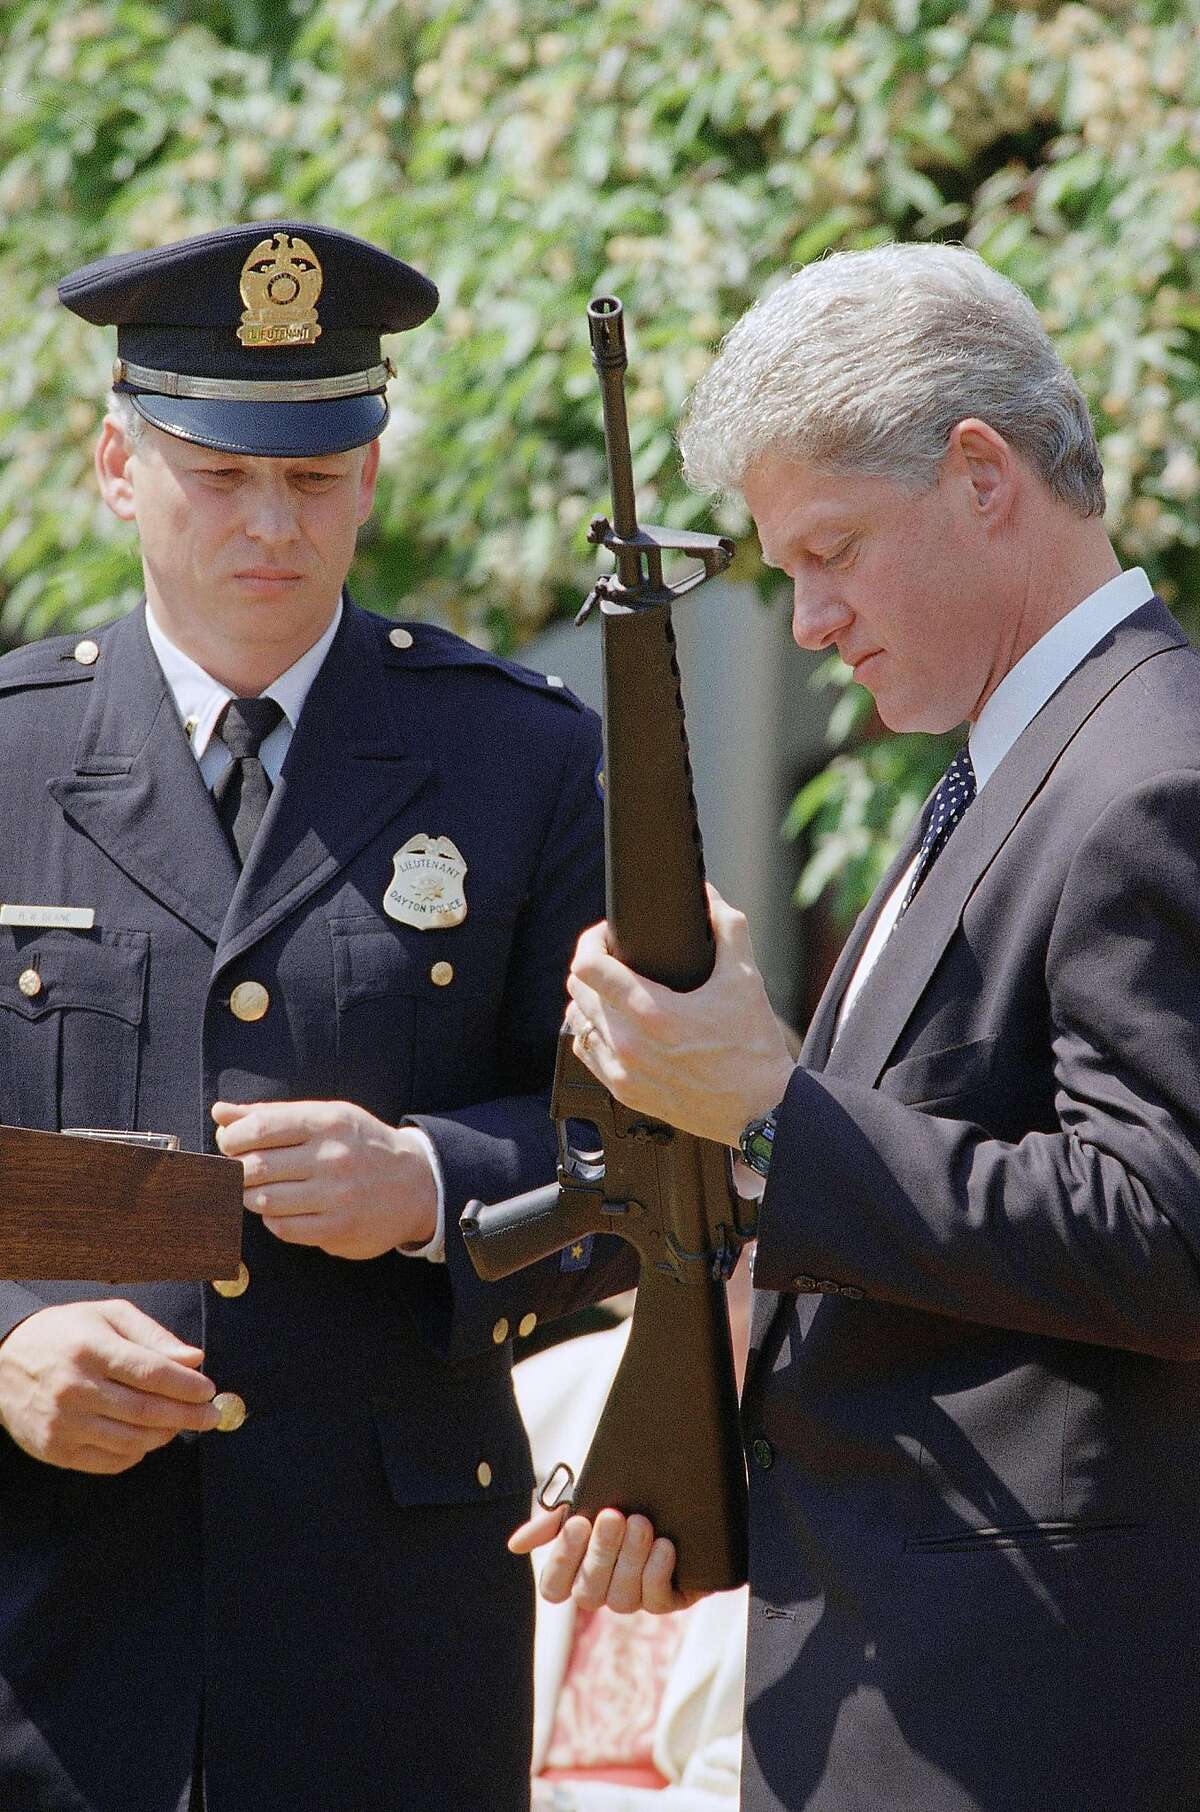 President Bill Clinton holds a Colt AR-15 rifle during a ceremony in the Rose Garden of the White House in Washington, April 25, 1994 where he launched efforts to pass the assault weapons ban. Dayton, Ohio Police Lt. Randy Bean, whose fellow officer Steve Whalen was gunned down with an AR-15 in 1991, looks on at left. (AP Photo/Dennis Cook)